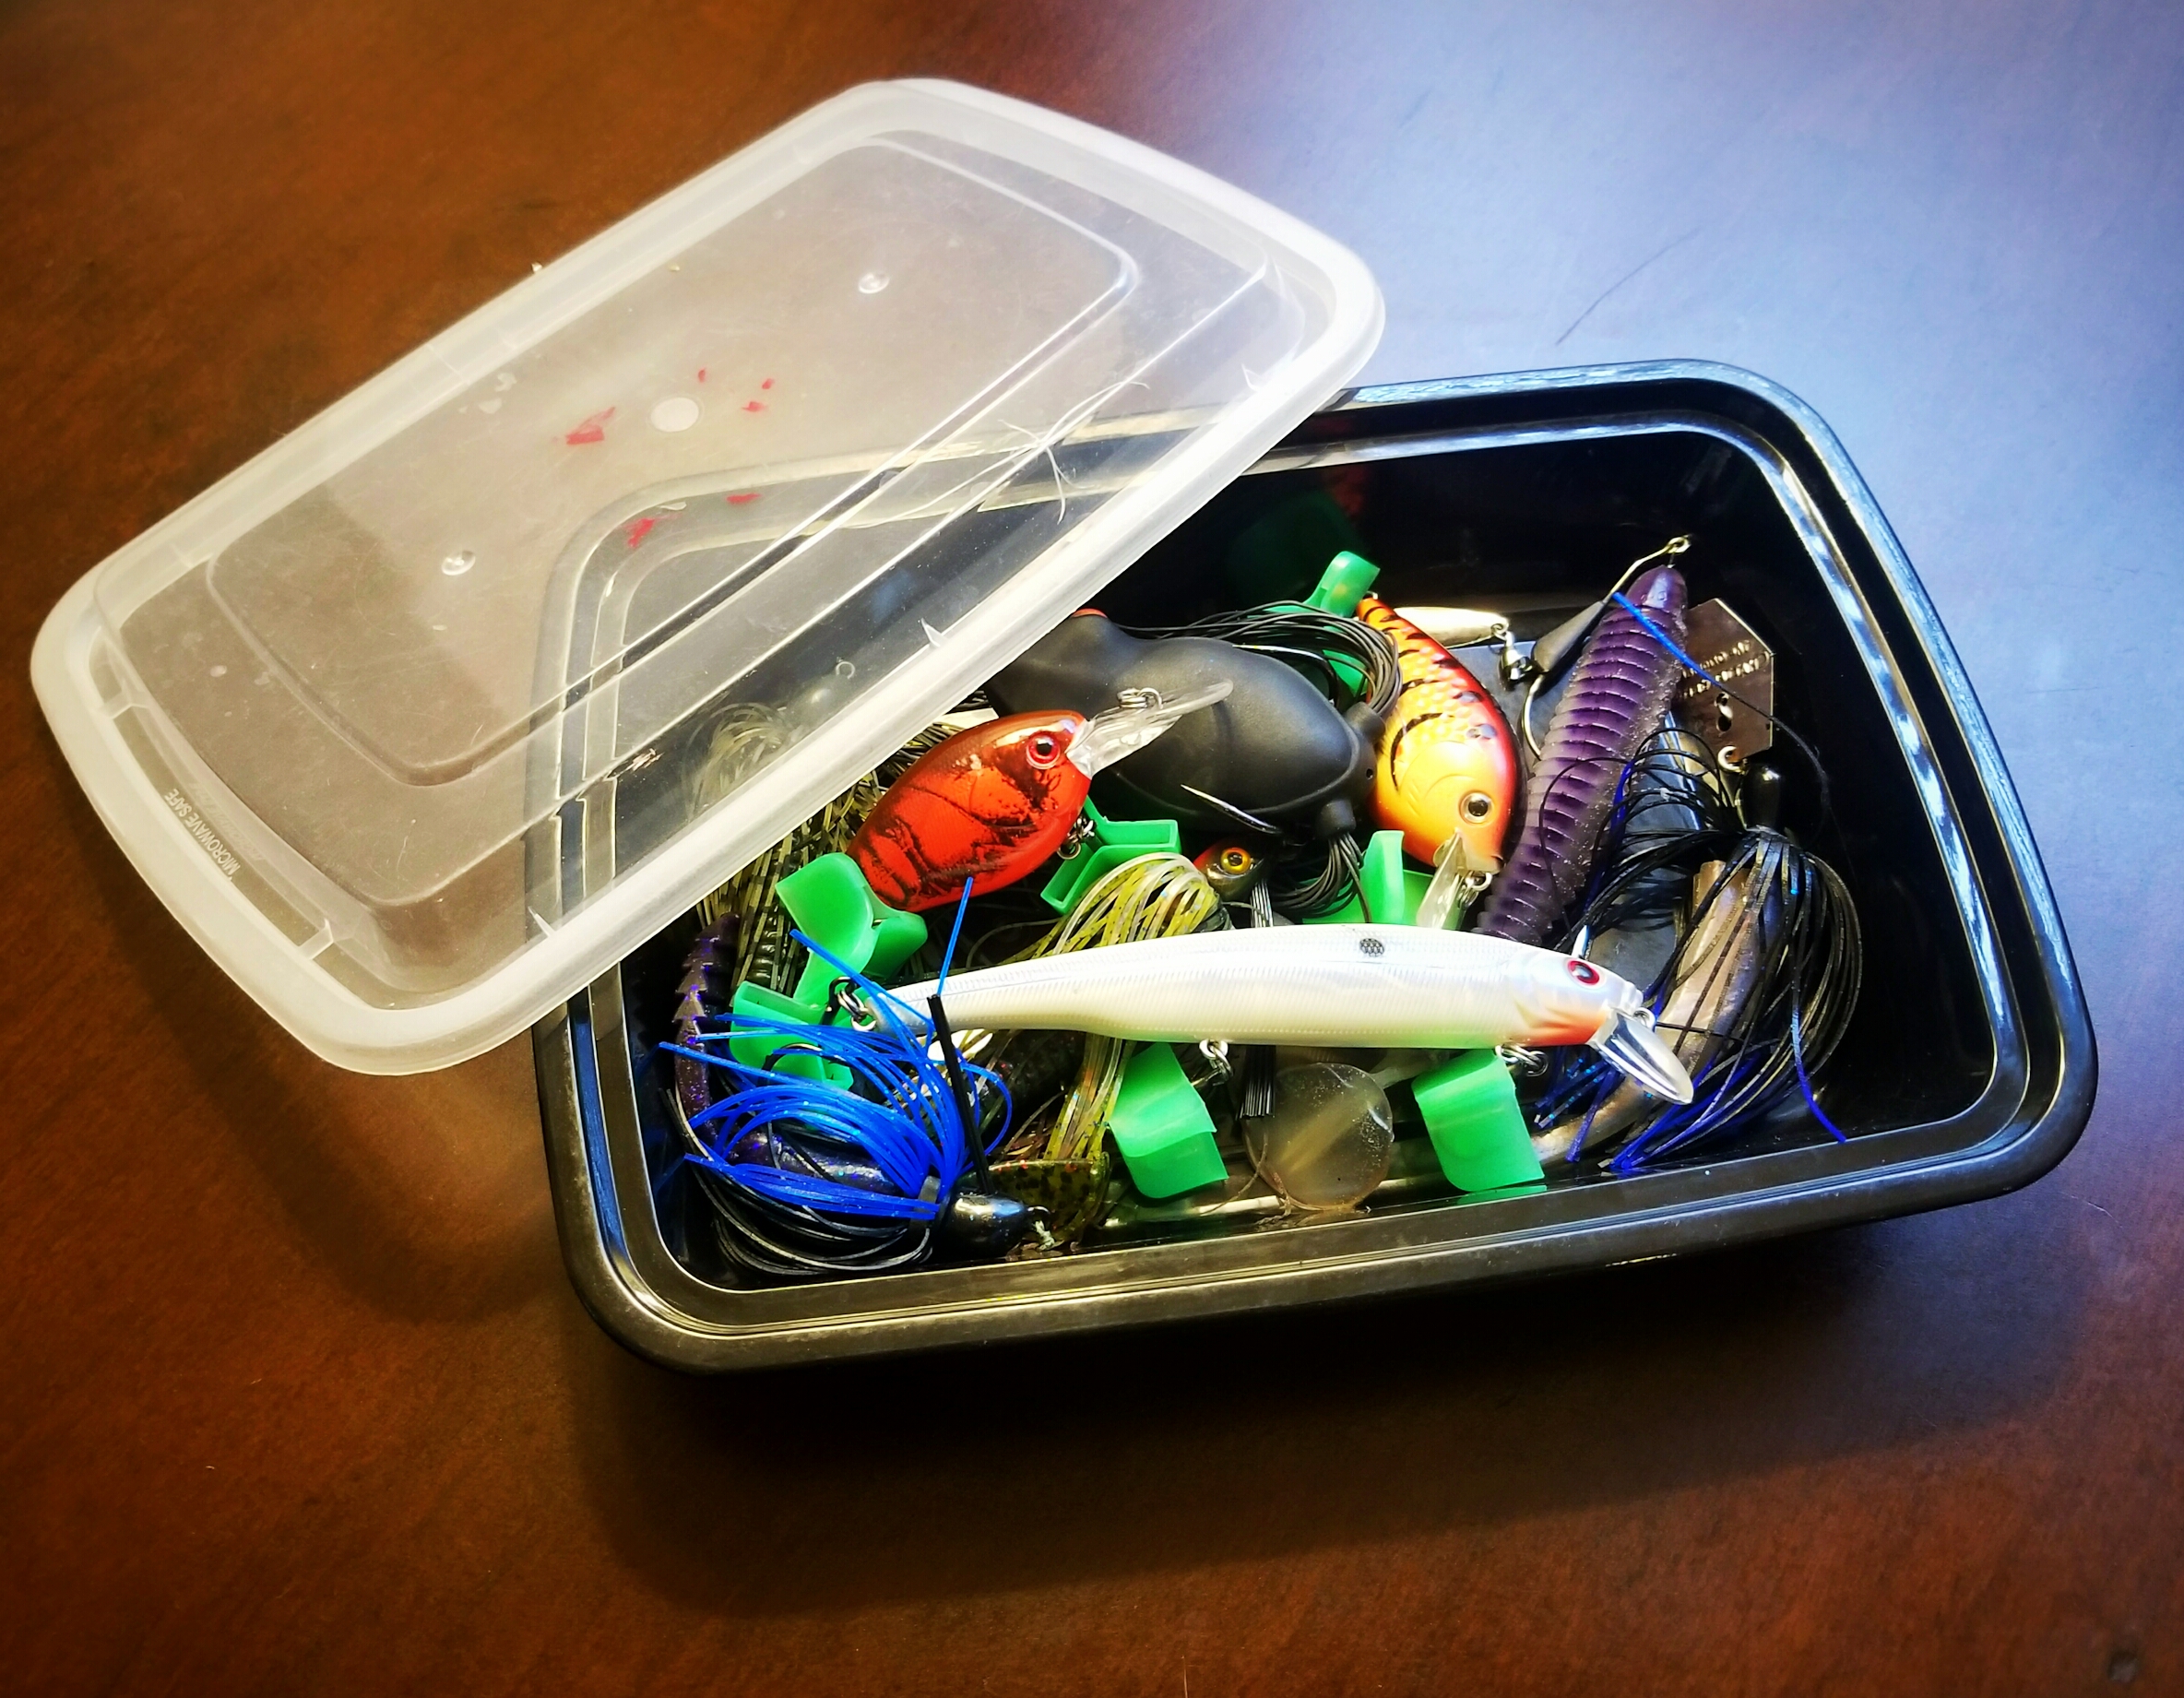 Recycled plastic takeout food container full of wet fishing lures